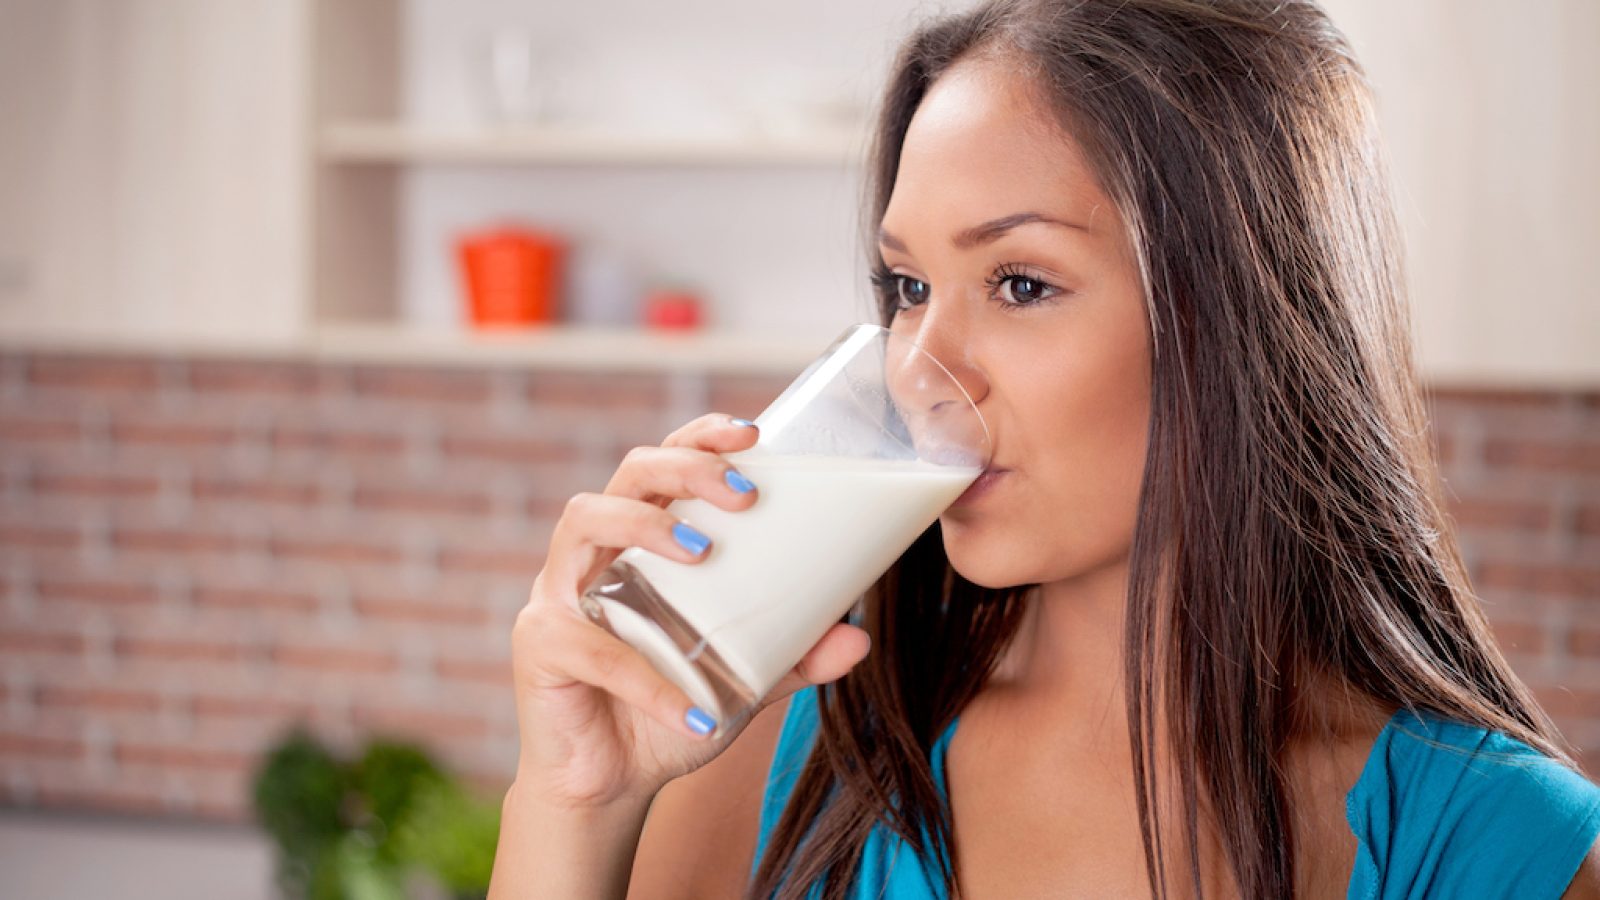 Study Finds the Benefits of Drinking Skim Milk Include Slowed Aging